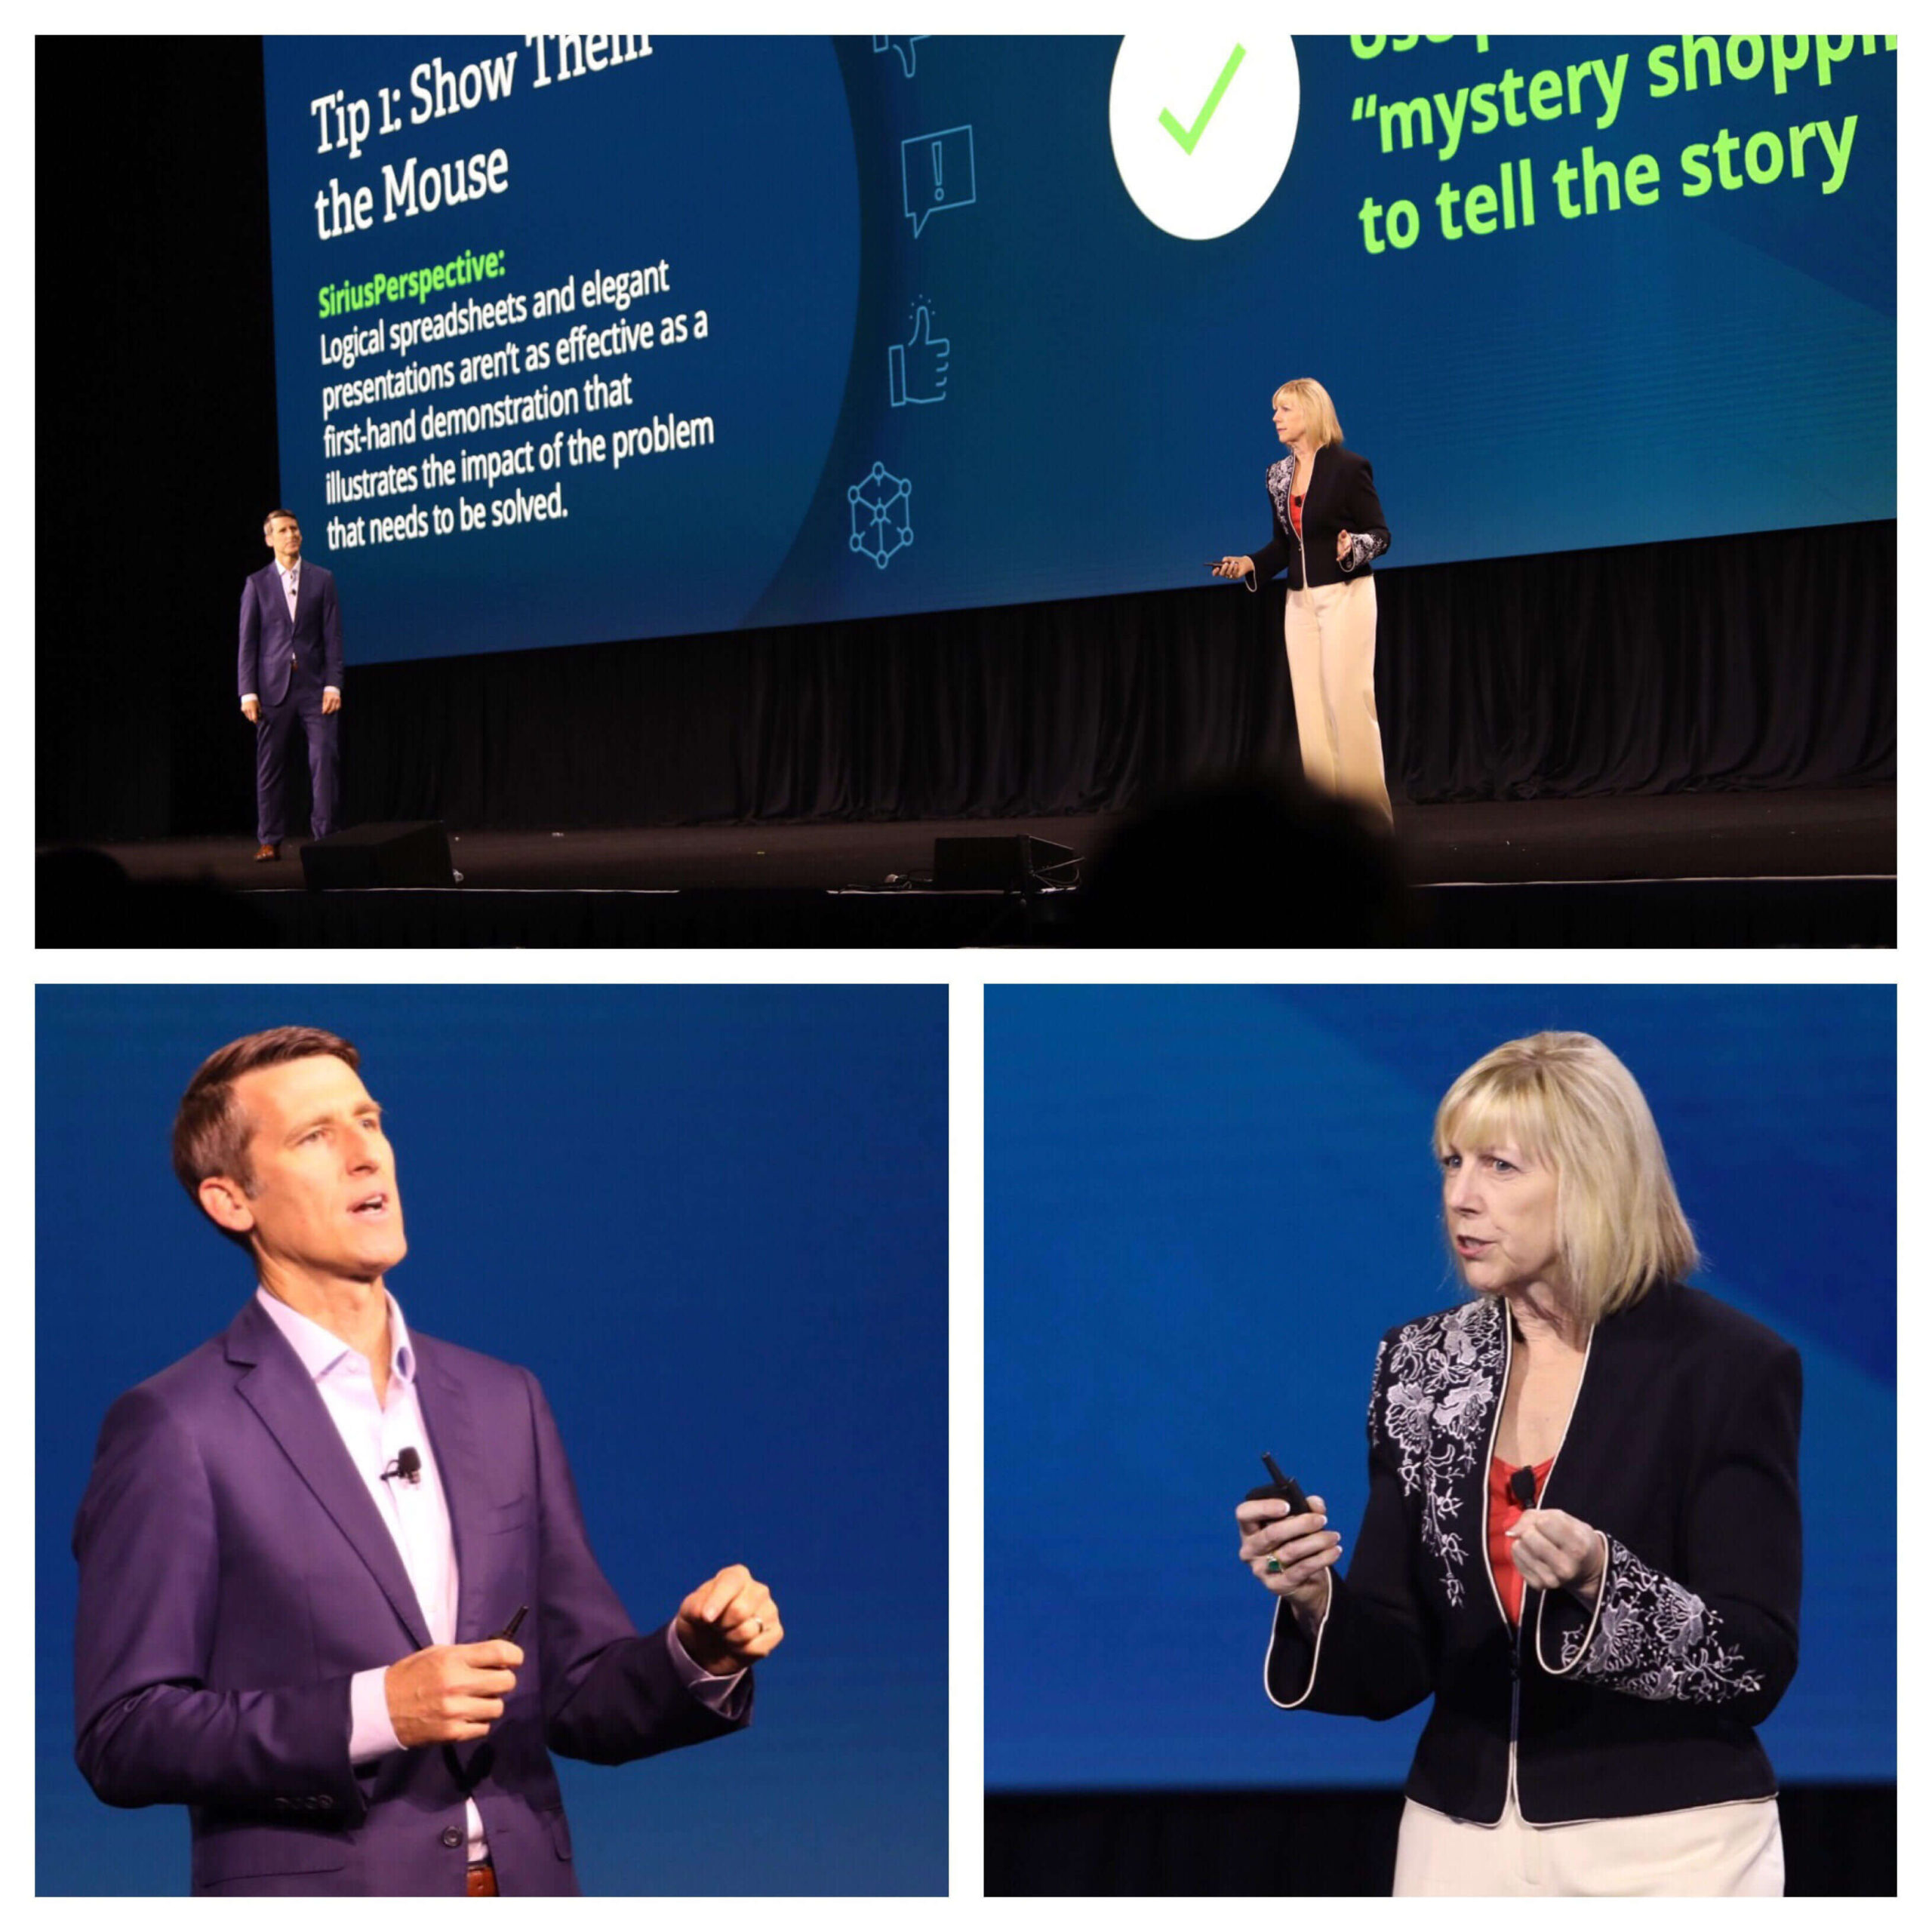 phil harrell and monica behncke on stage at Summit 2019